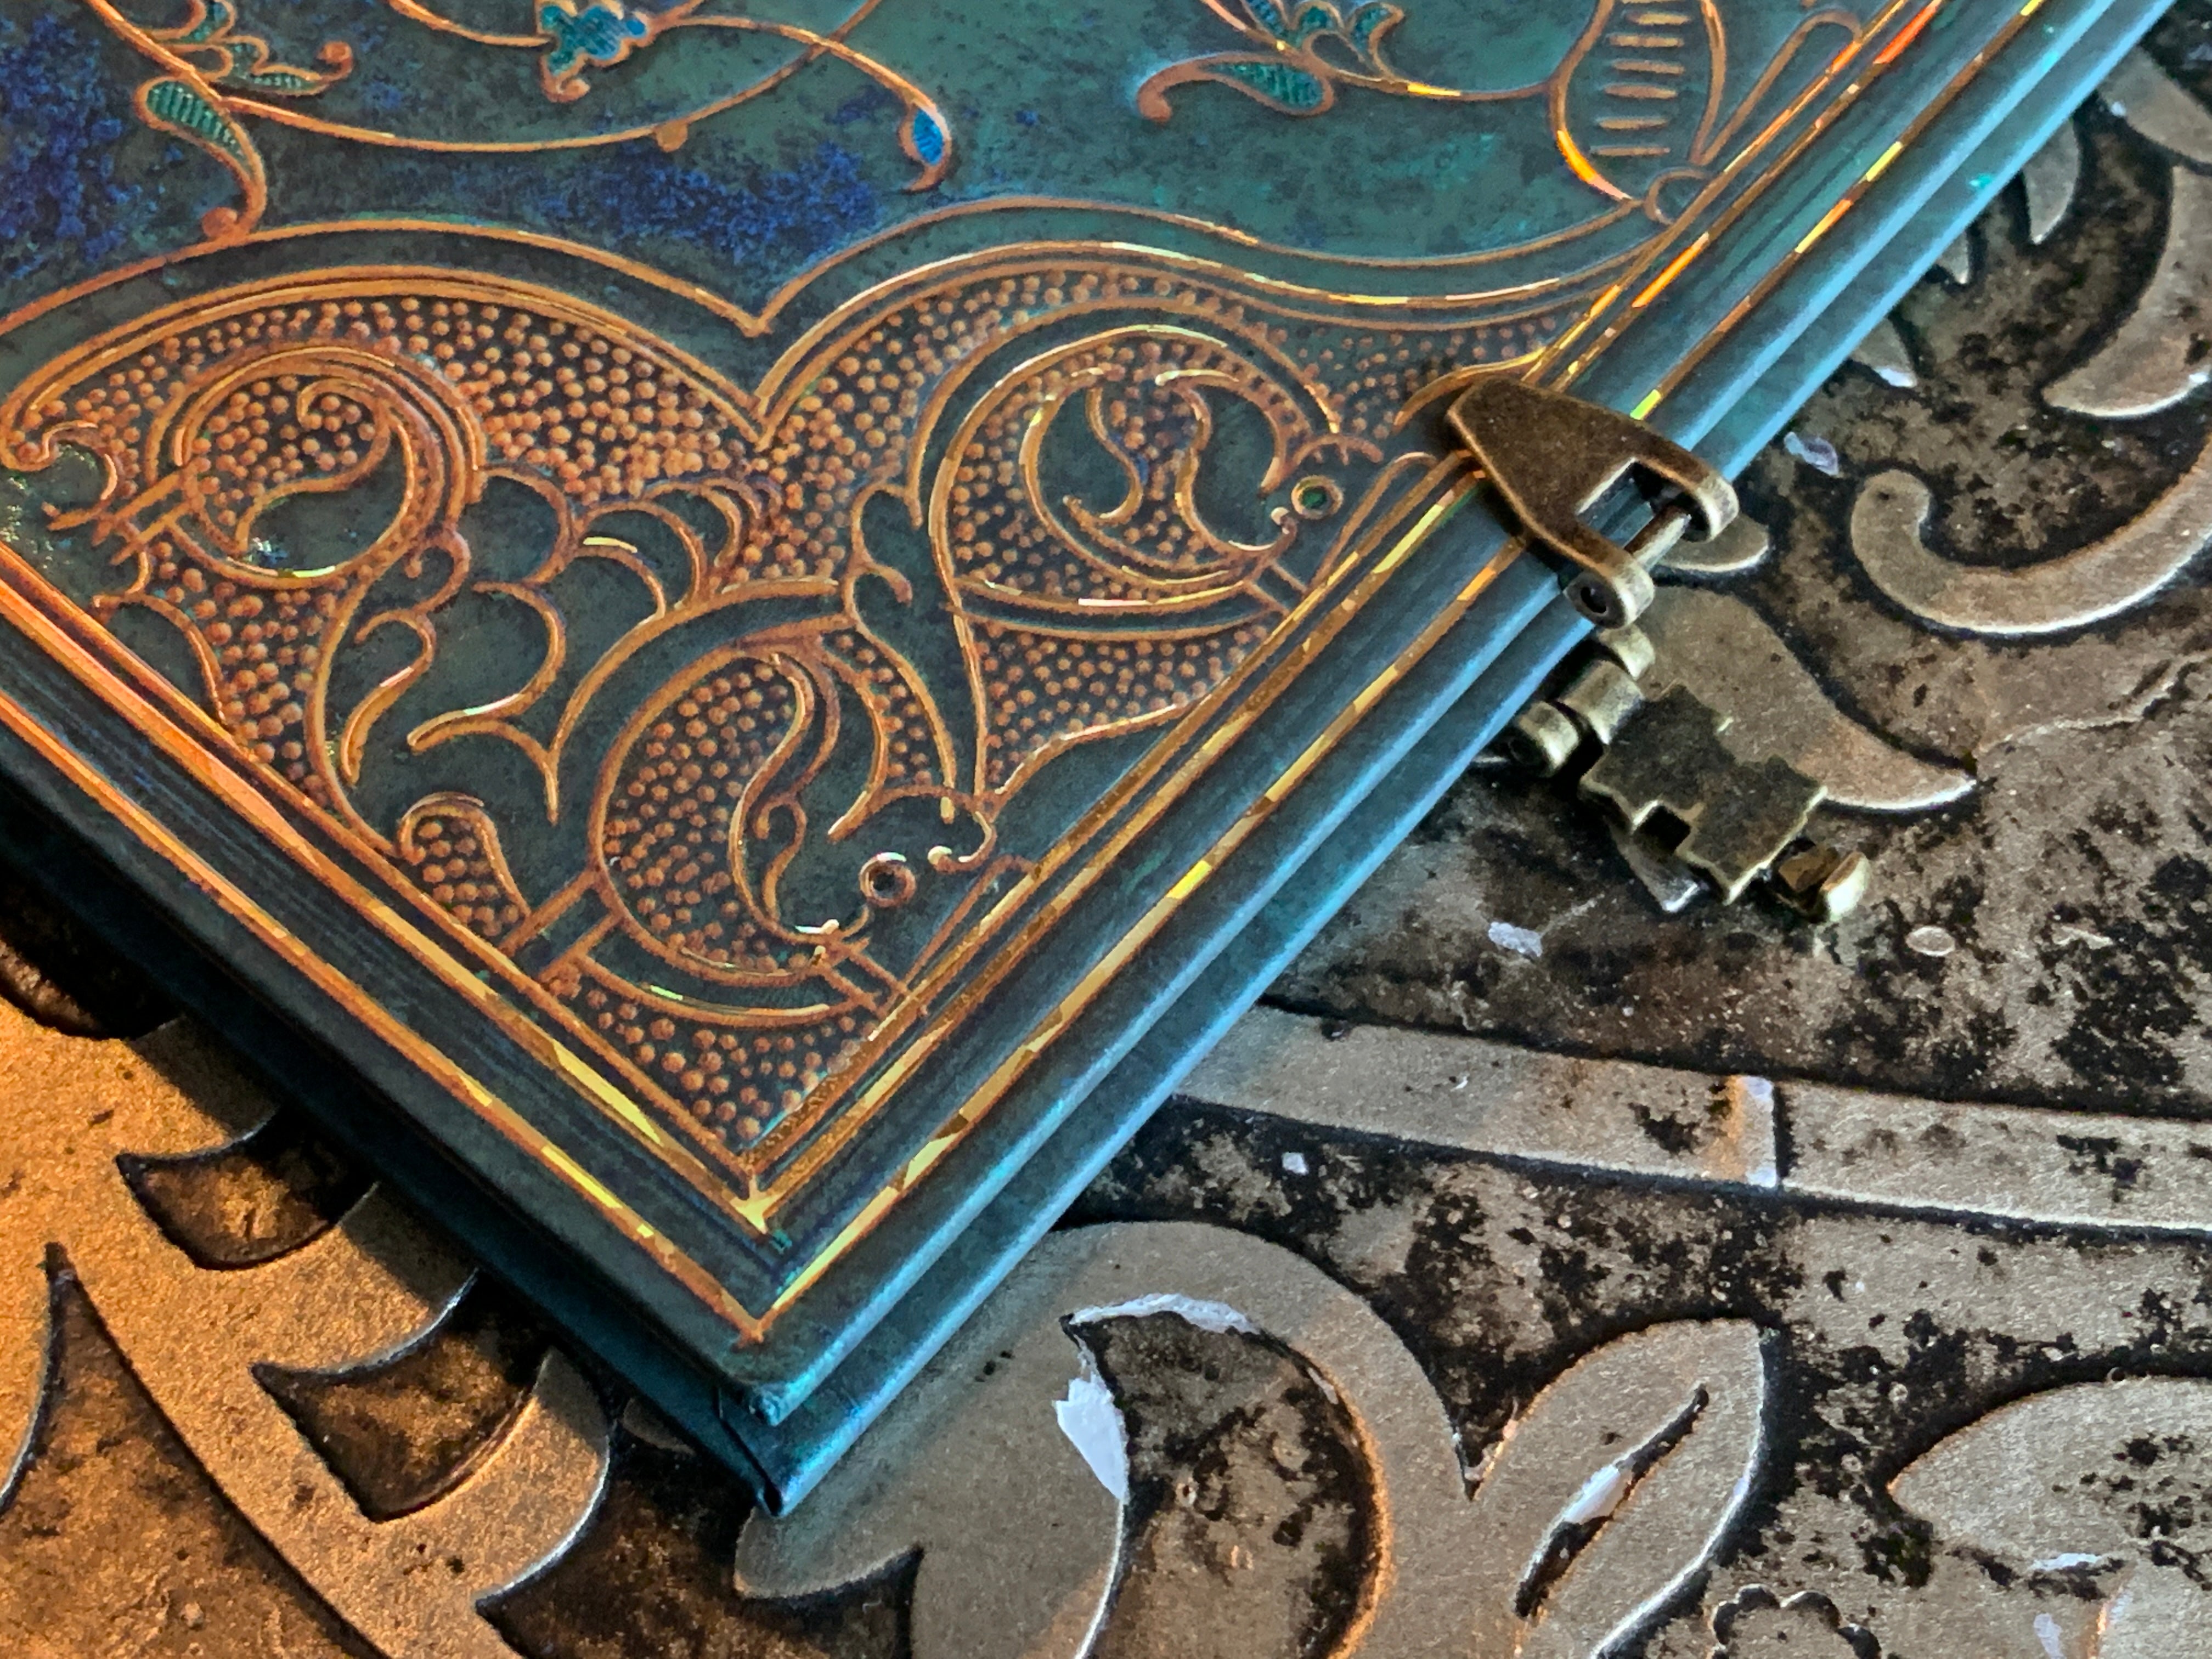 Turquoise Chronicles, Blank Journal/Sketchbook, with Gilt Cover and Metal Latches, Lined, Paperblanks, 8.25in x 11.75in